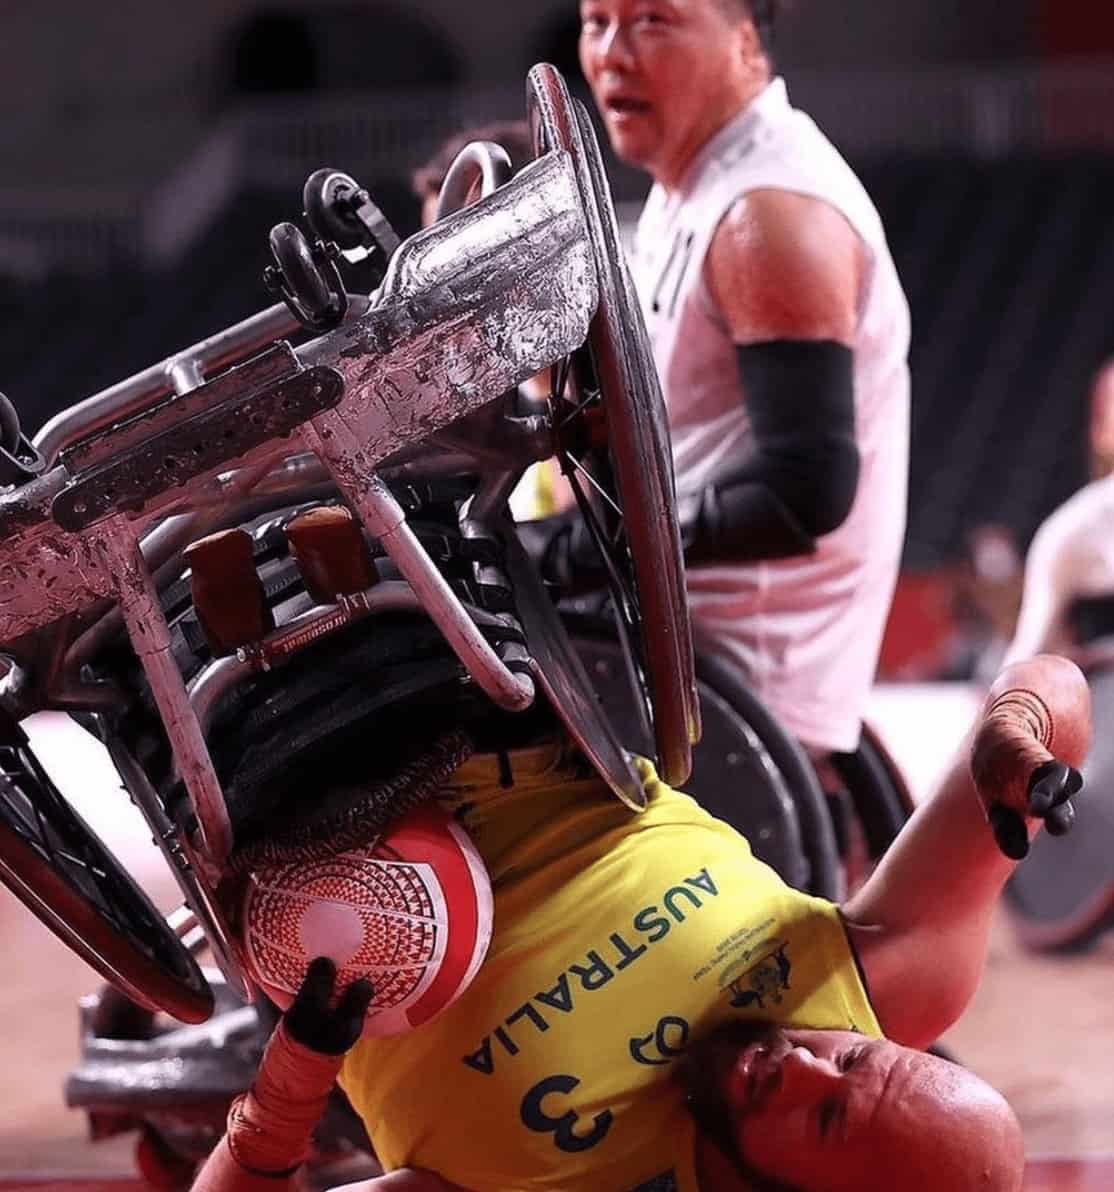 Australian Paralympian fallen over after a collision in a game of wheelchair rugby.